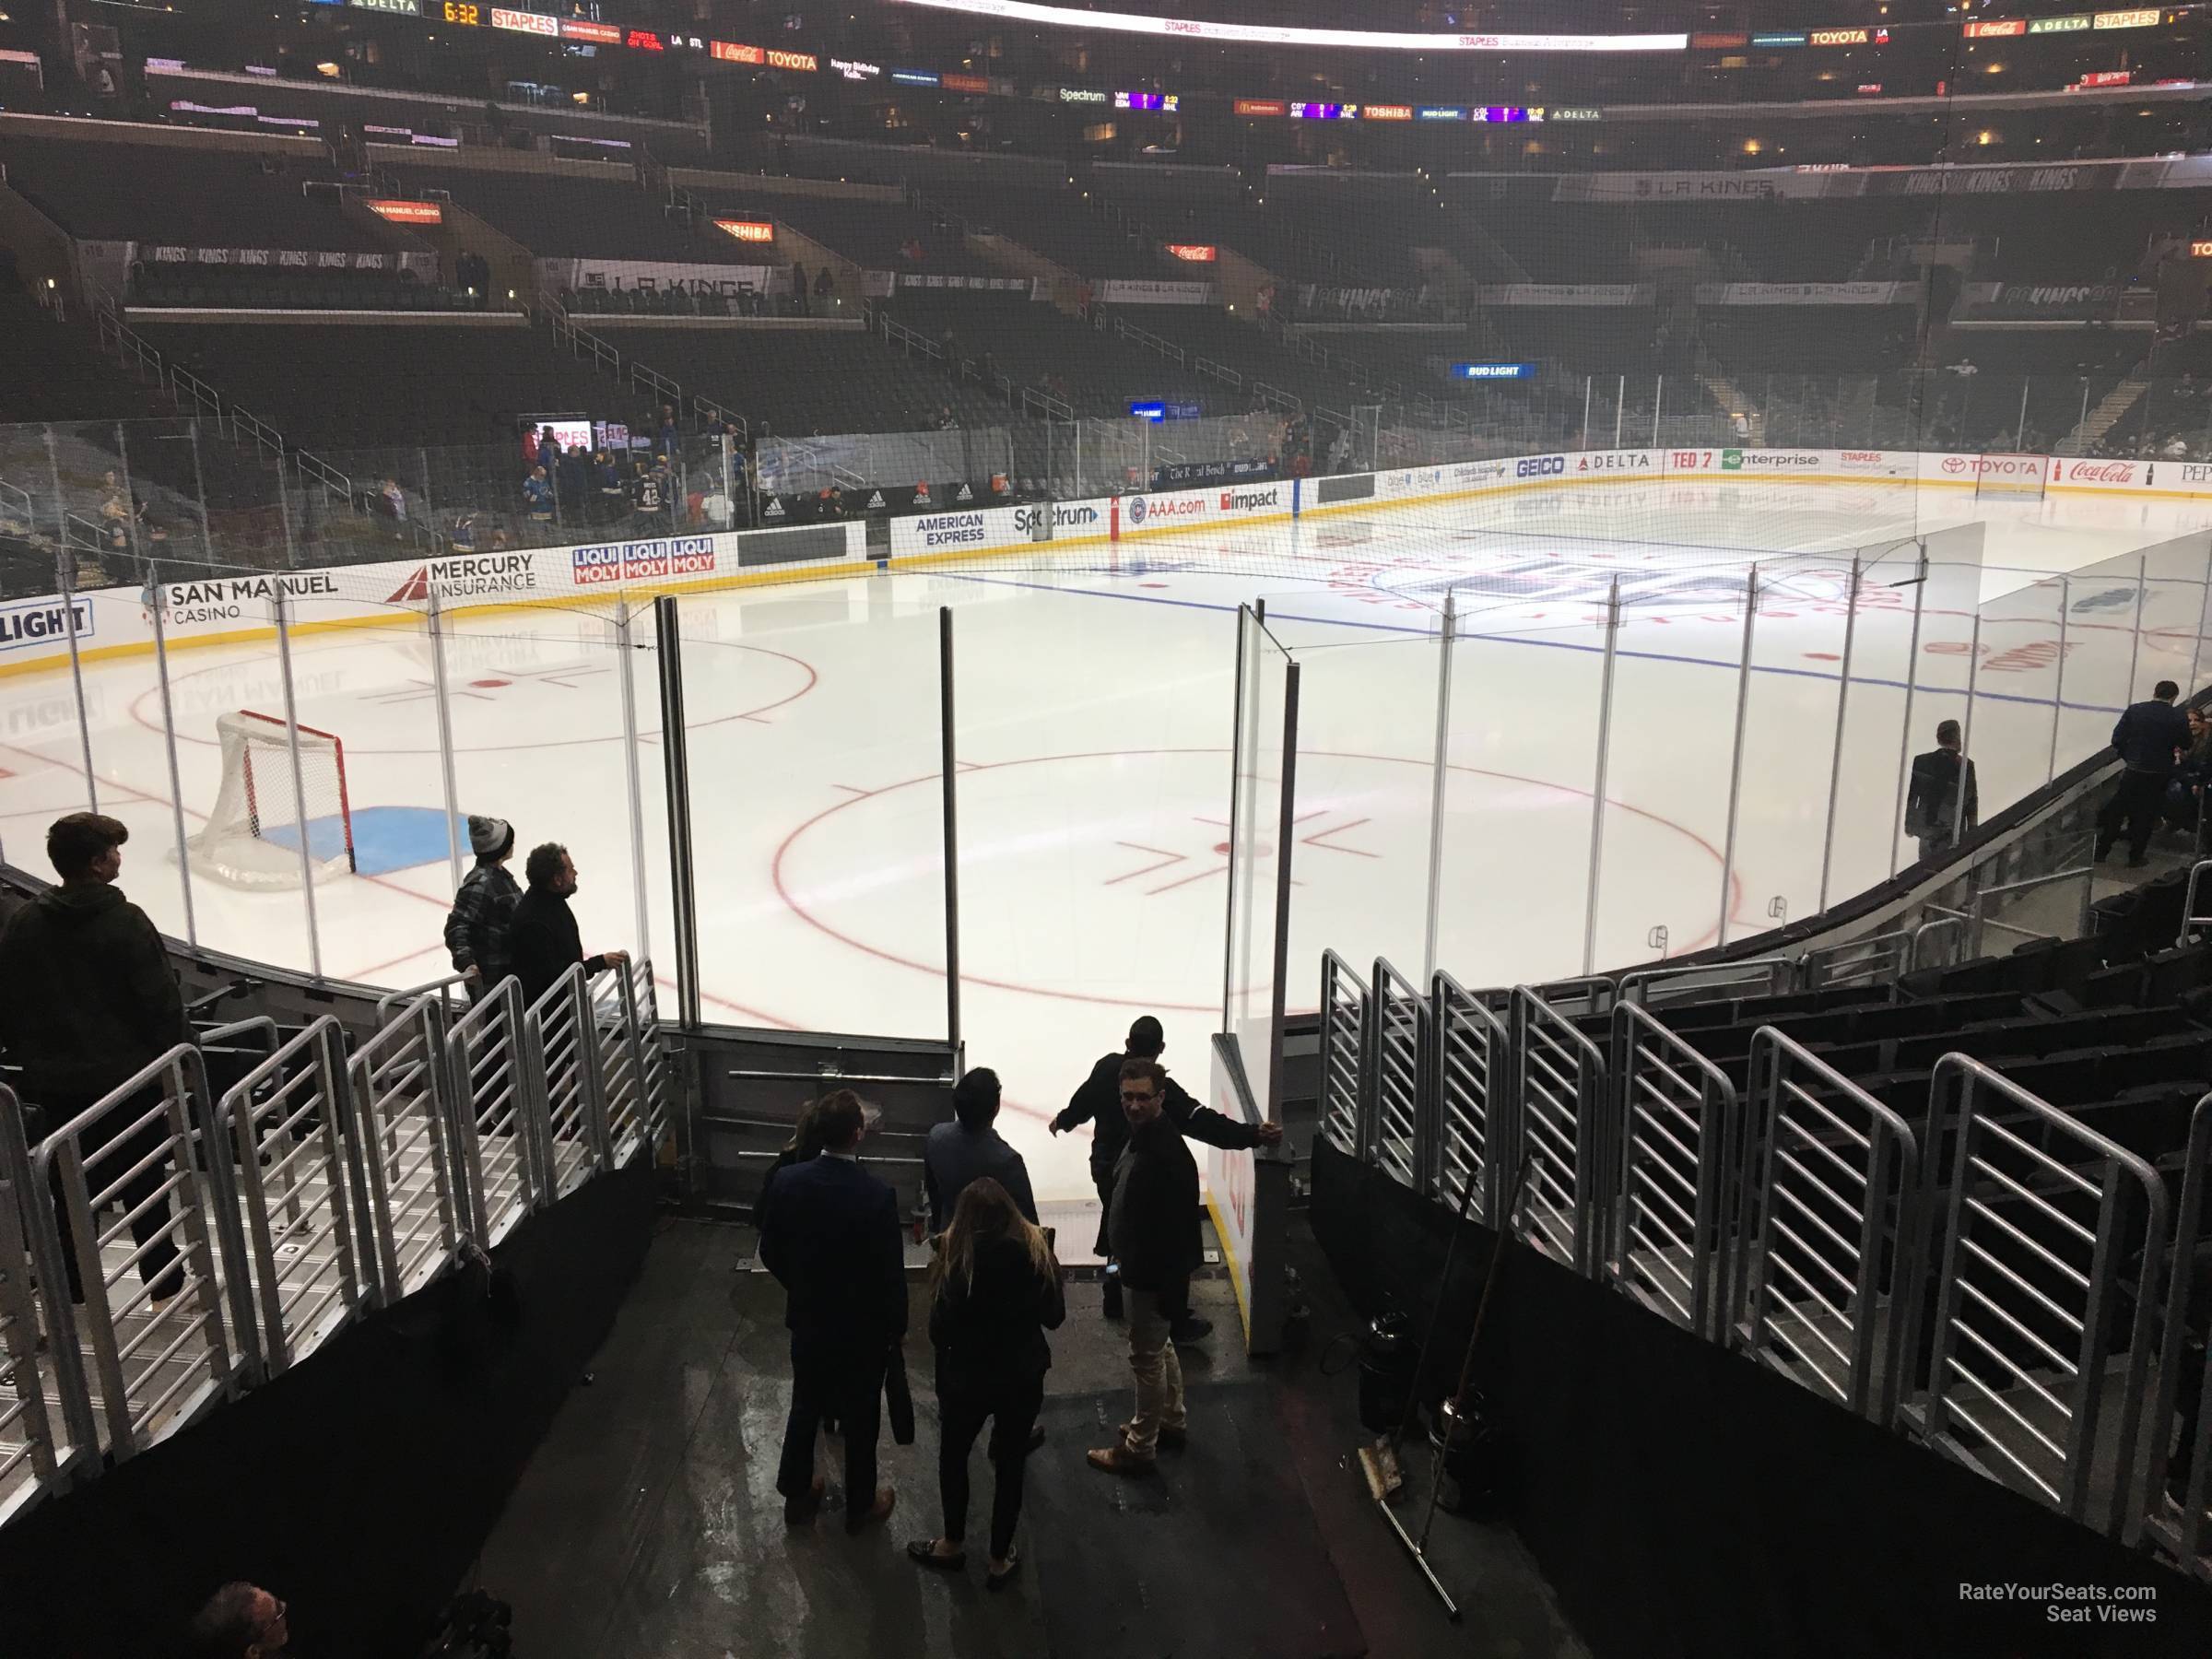 section 114, row 15 seat view  for hockey - crypto.com arena